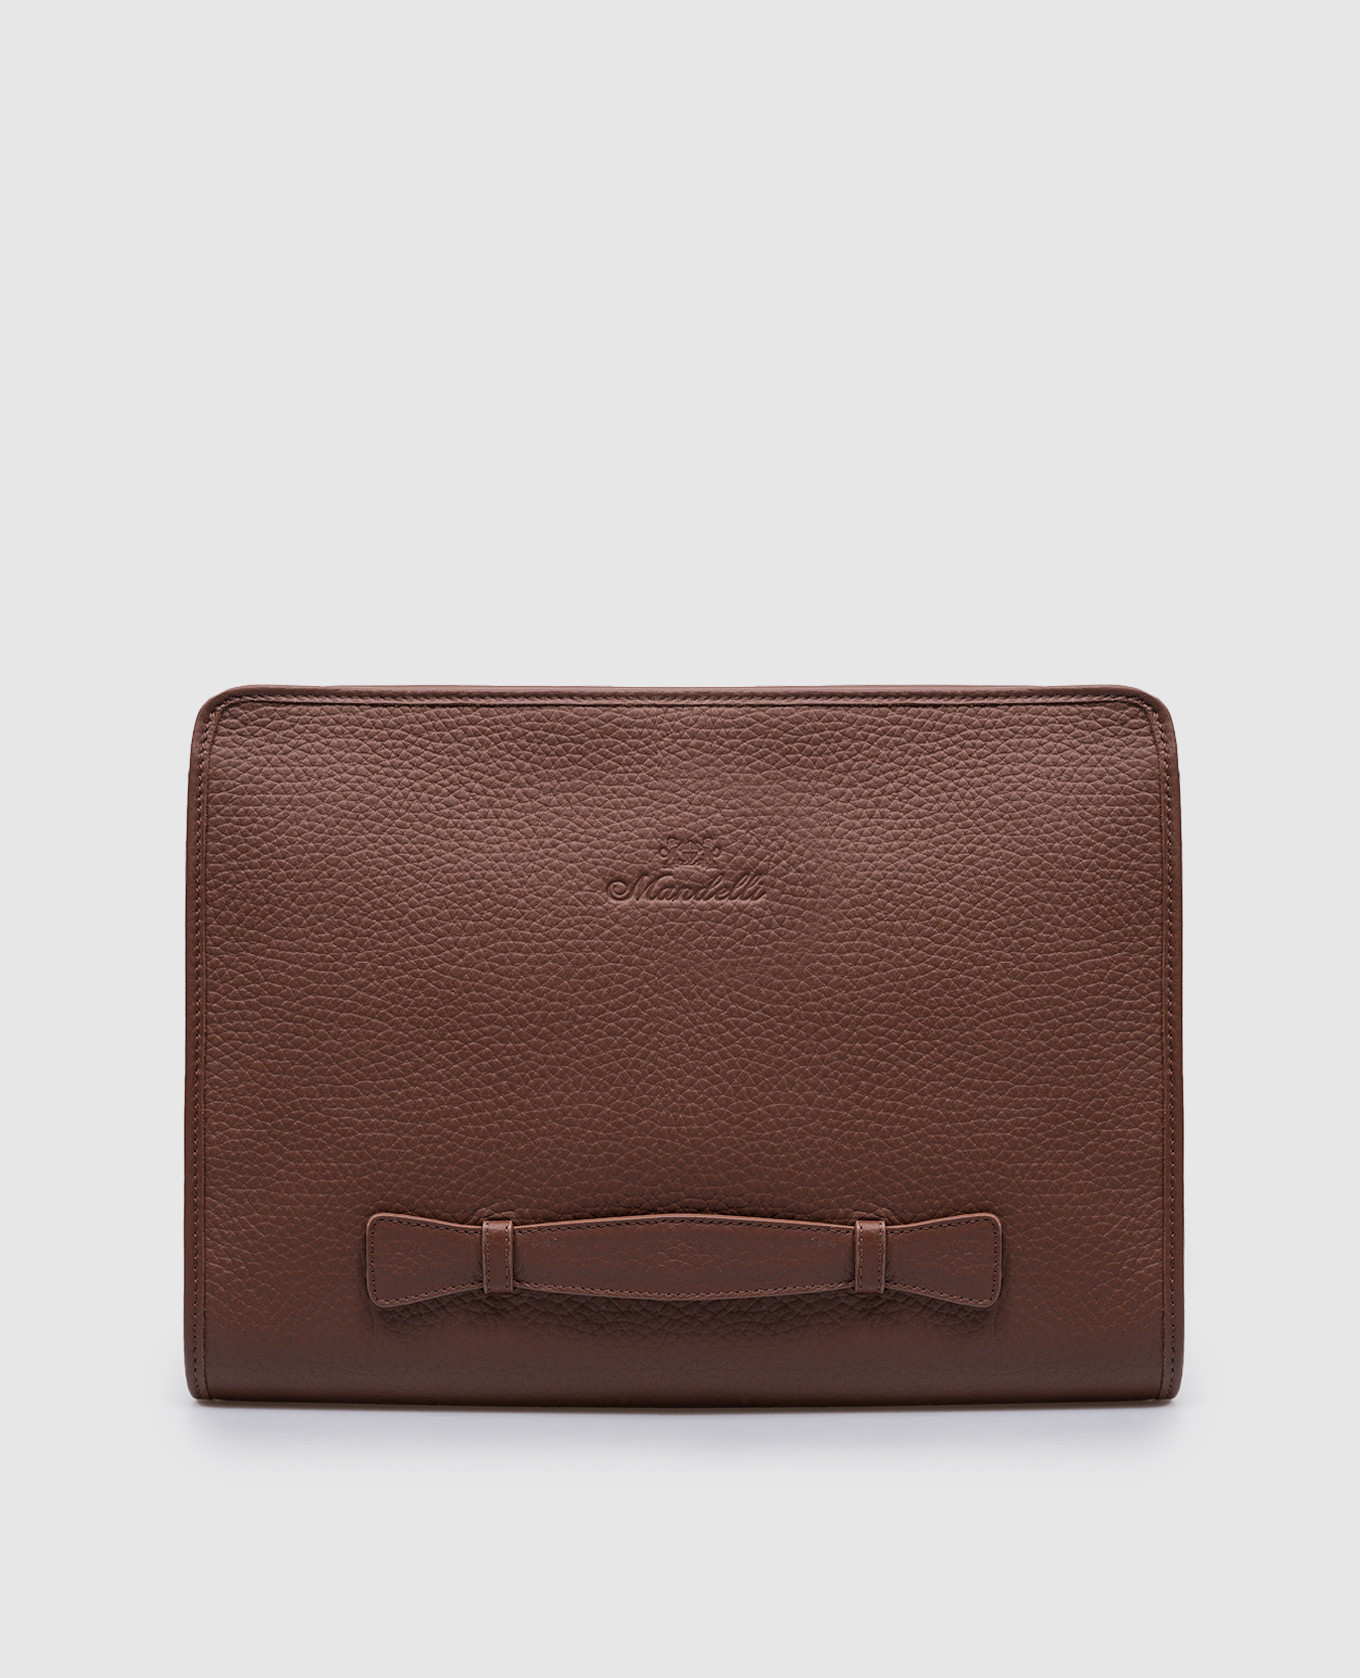 Brown leather folder for documents with embossed logo